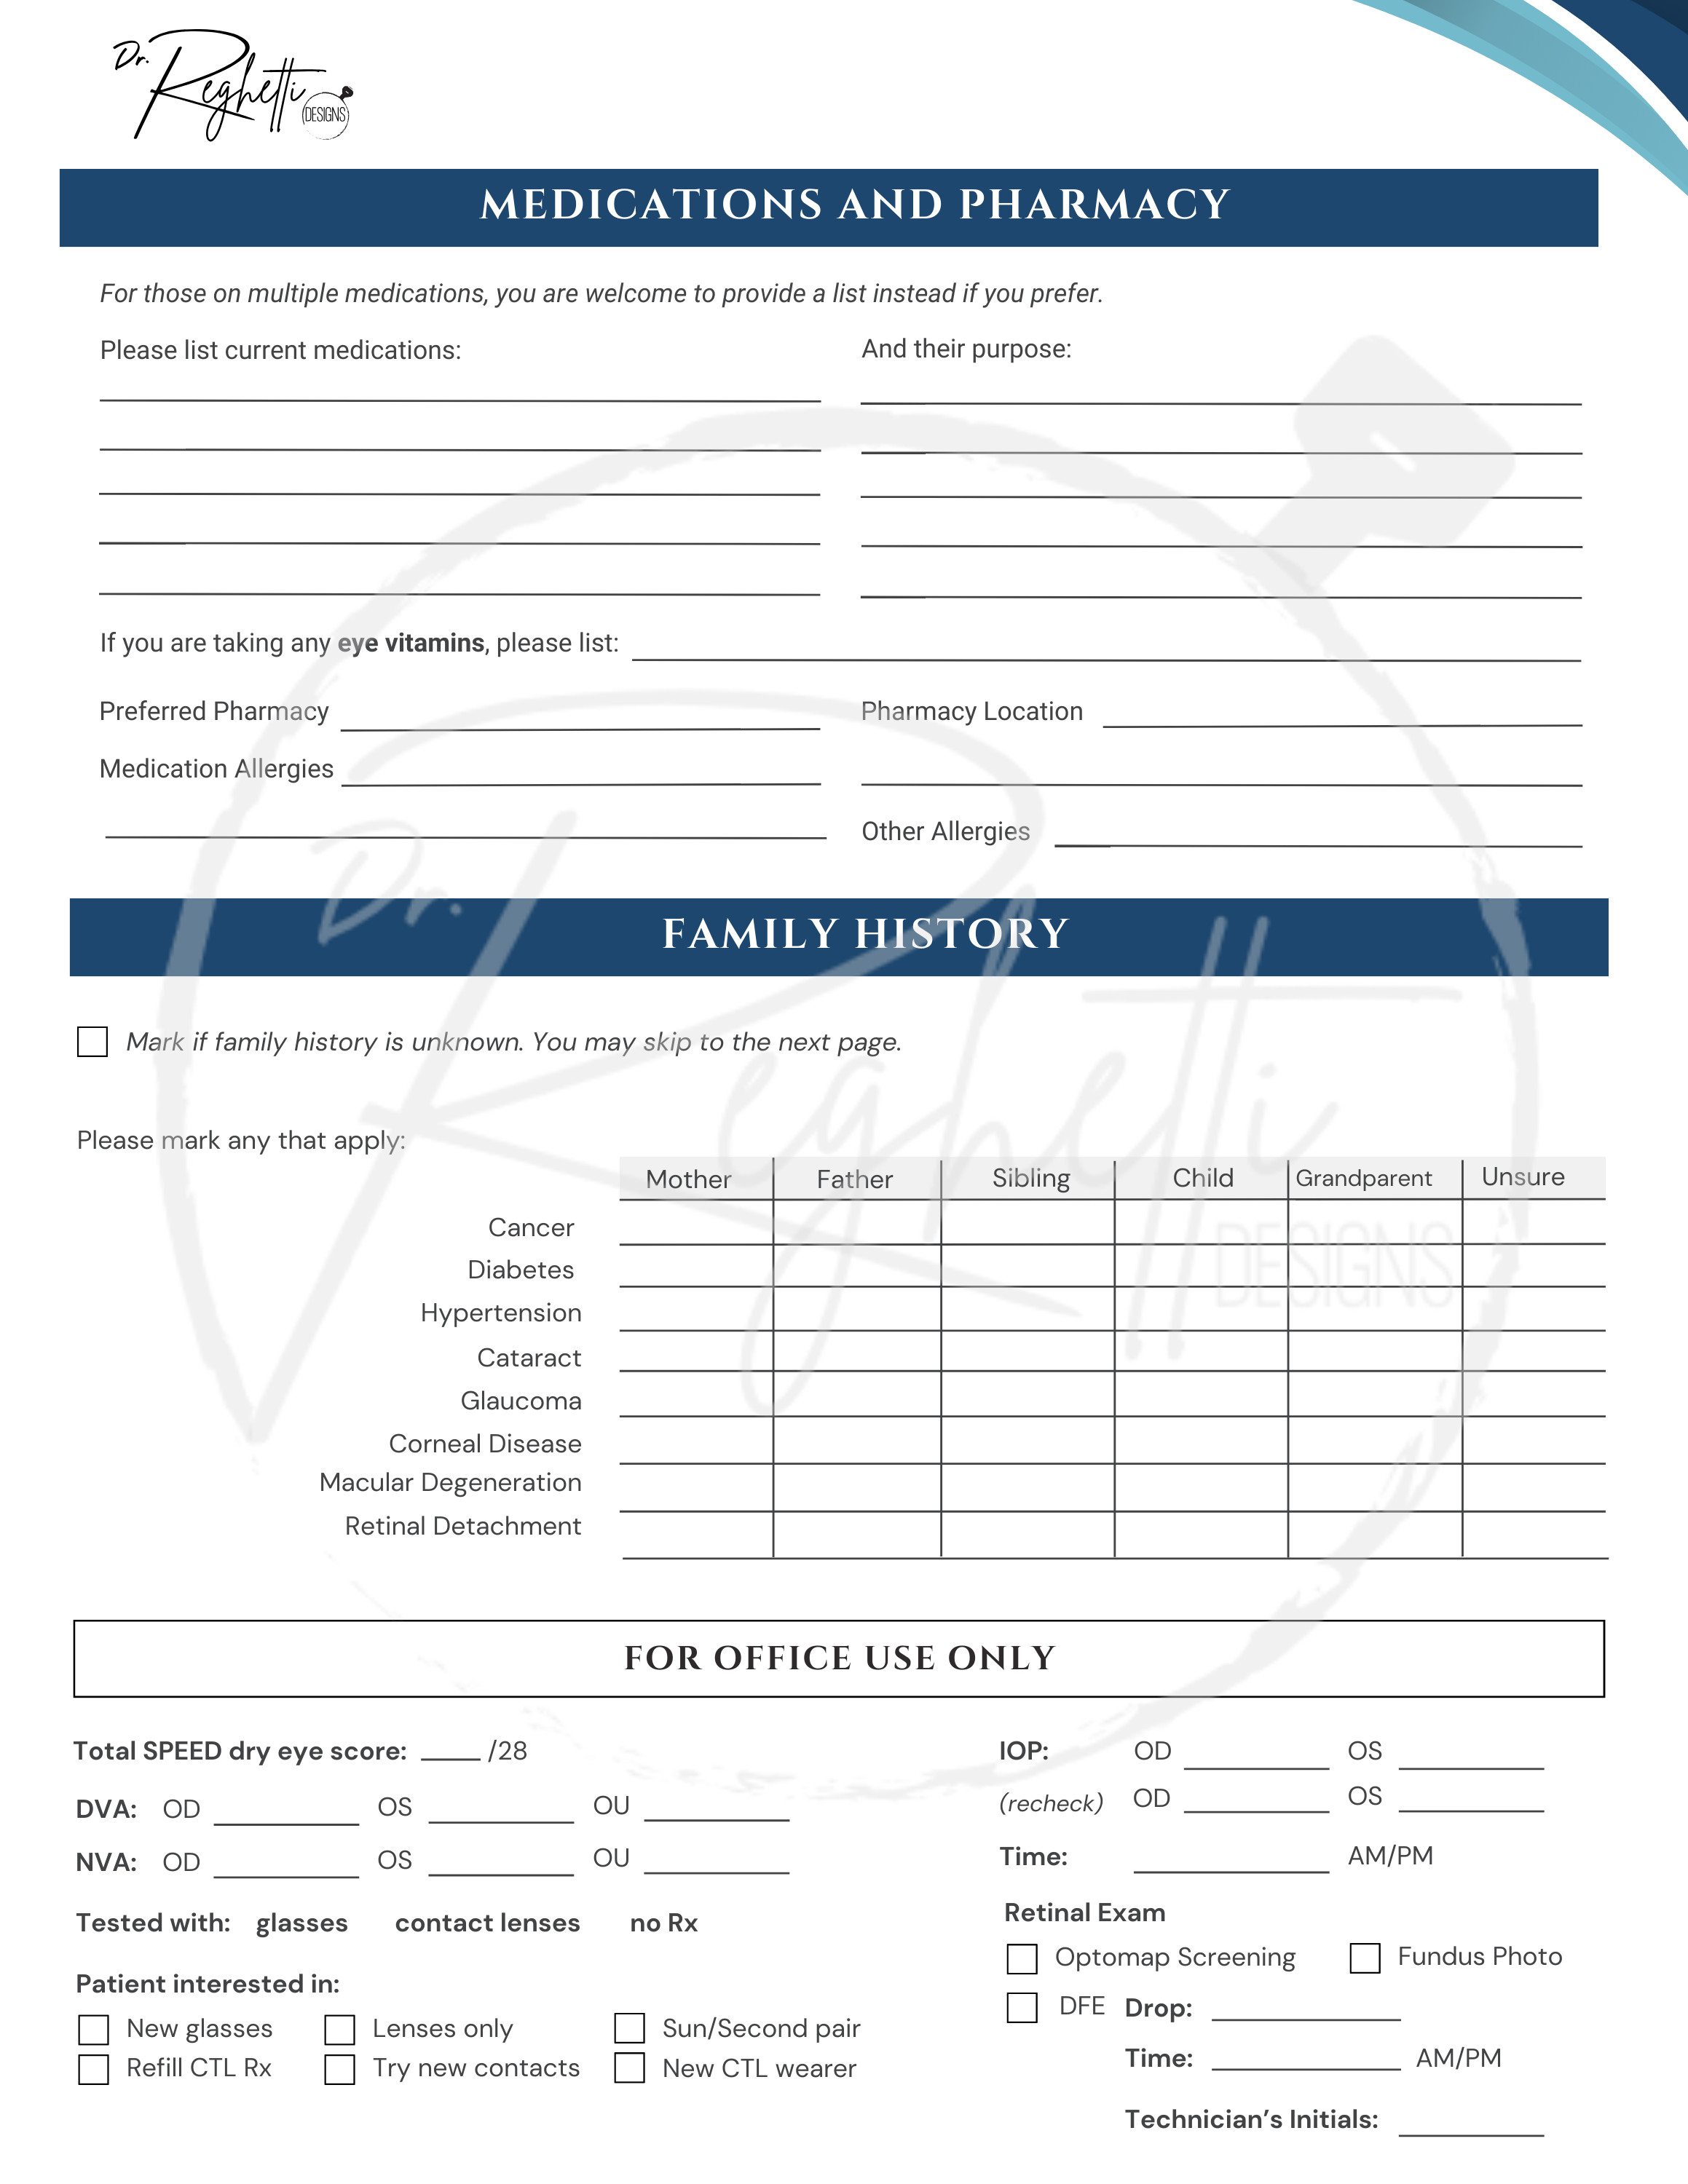 patient intake form for optometrists